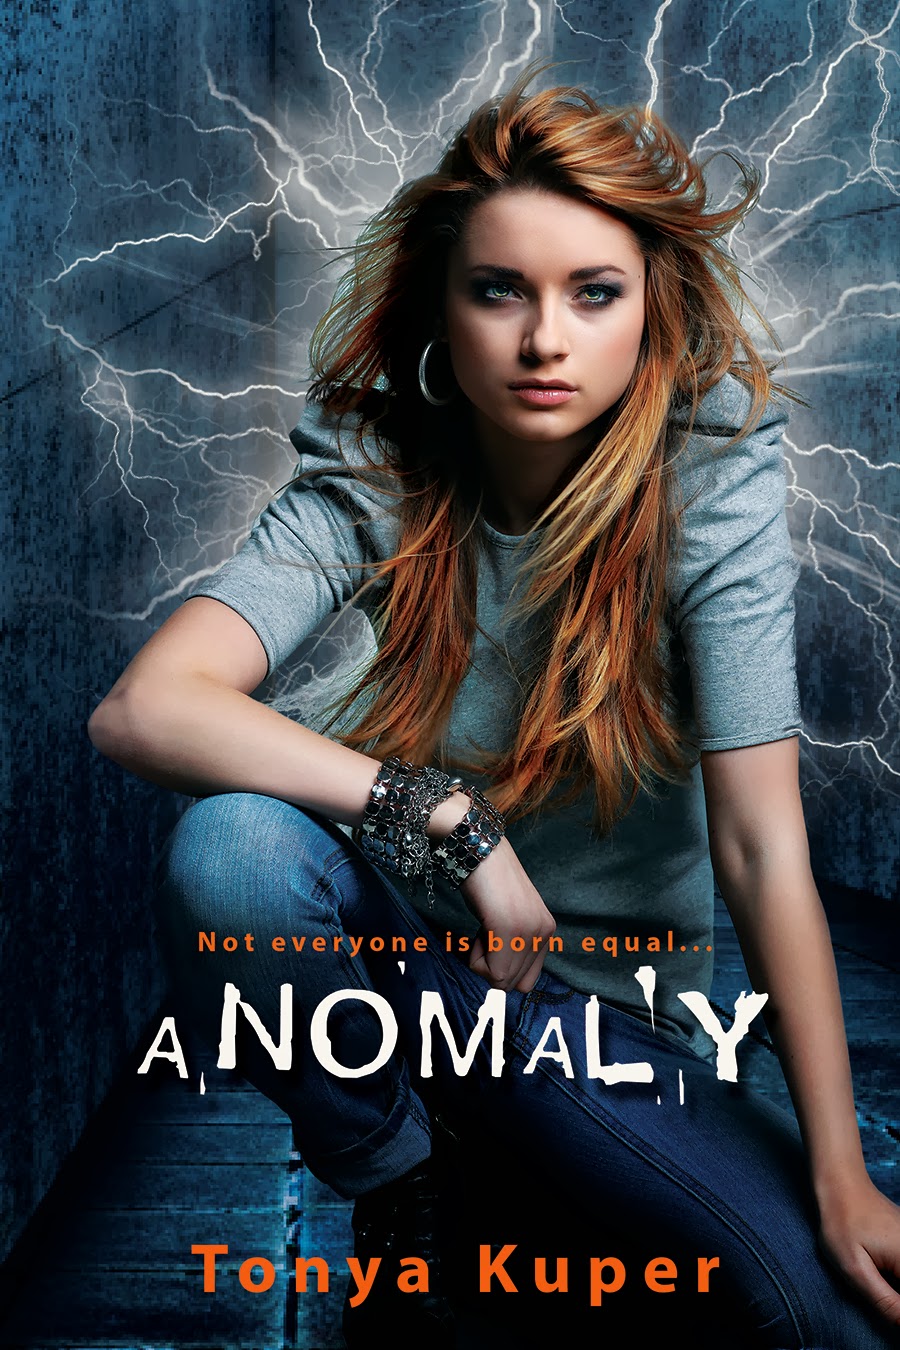 http://bookladysreviews.blogspot.com/2014/02/cover-reveal-anomaly-by-tonya-kuper.html